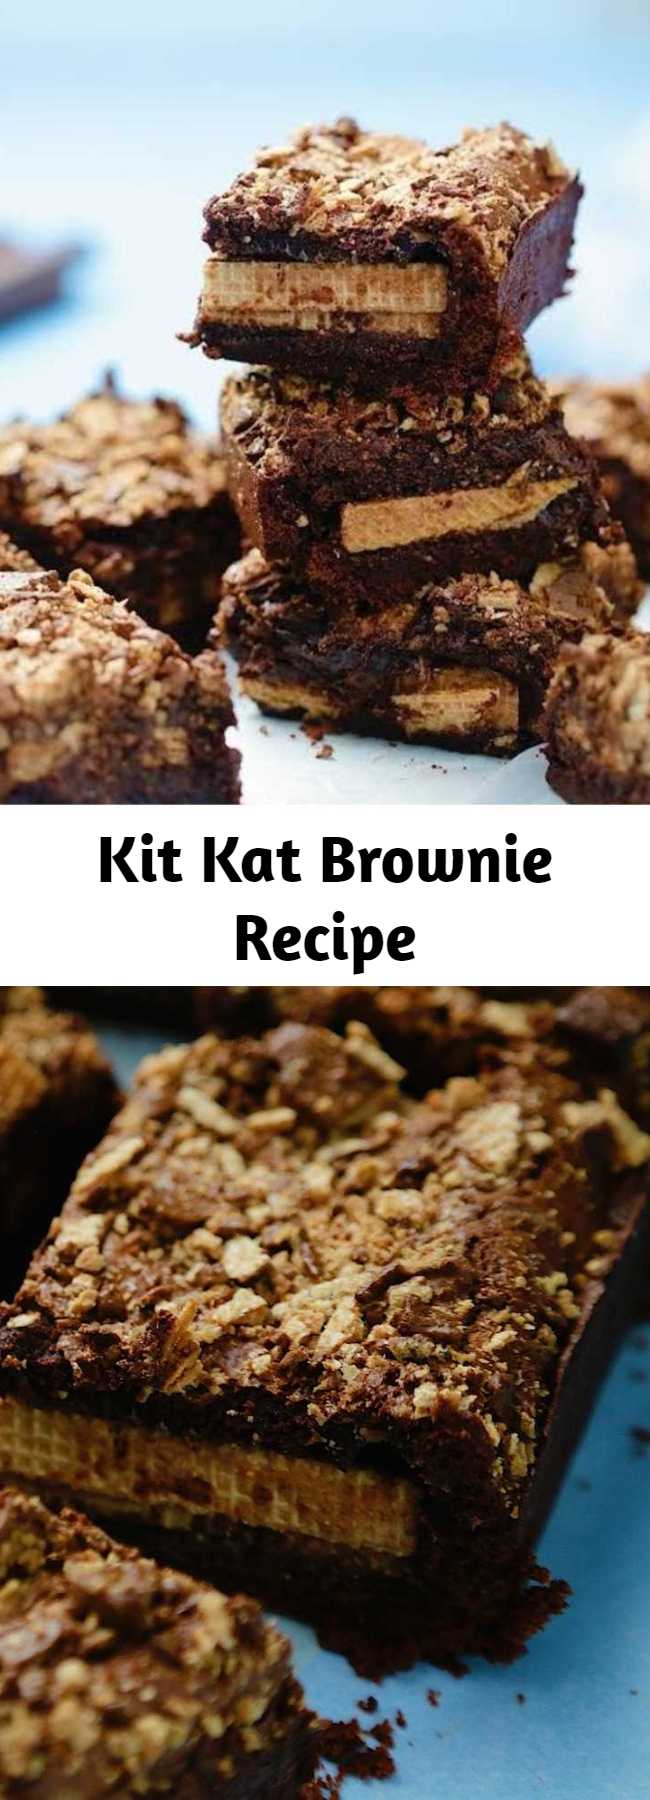 Kit Kat Brownie Recipe - We added some Kit Kats and took brownies to a whole new level.